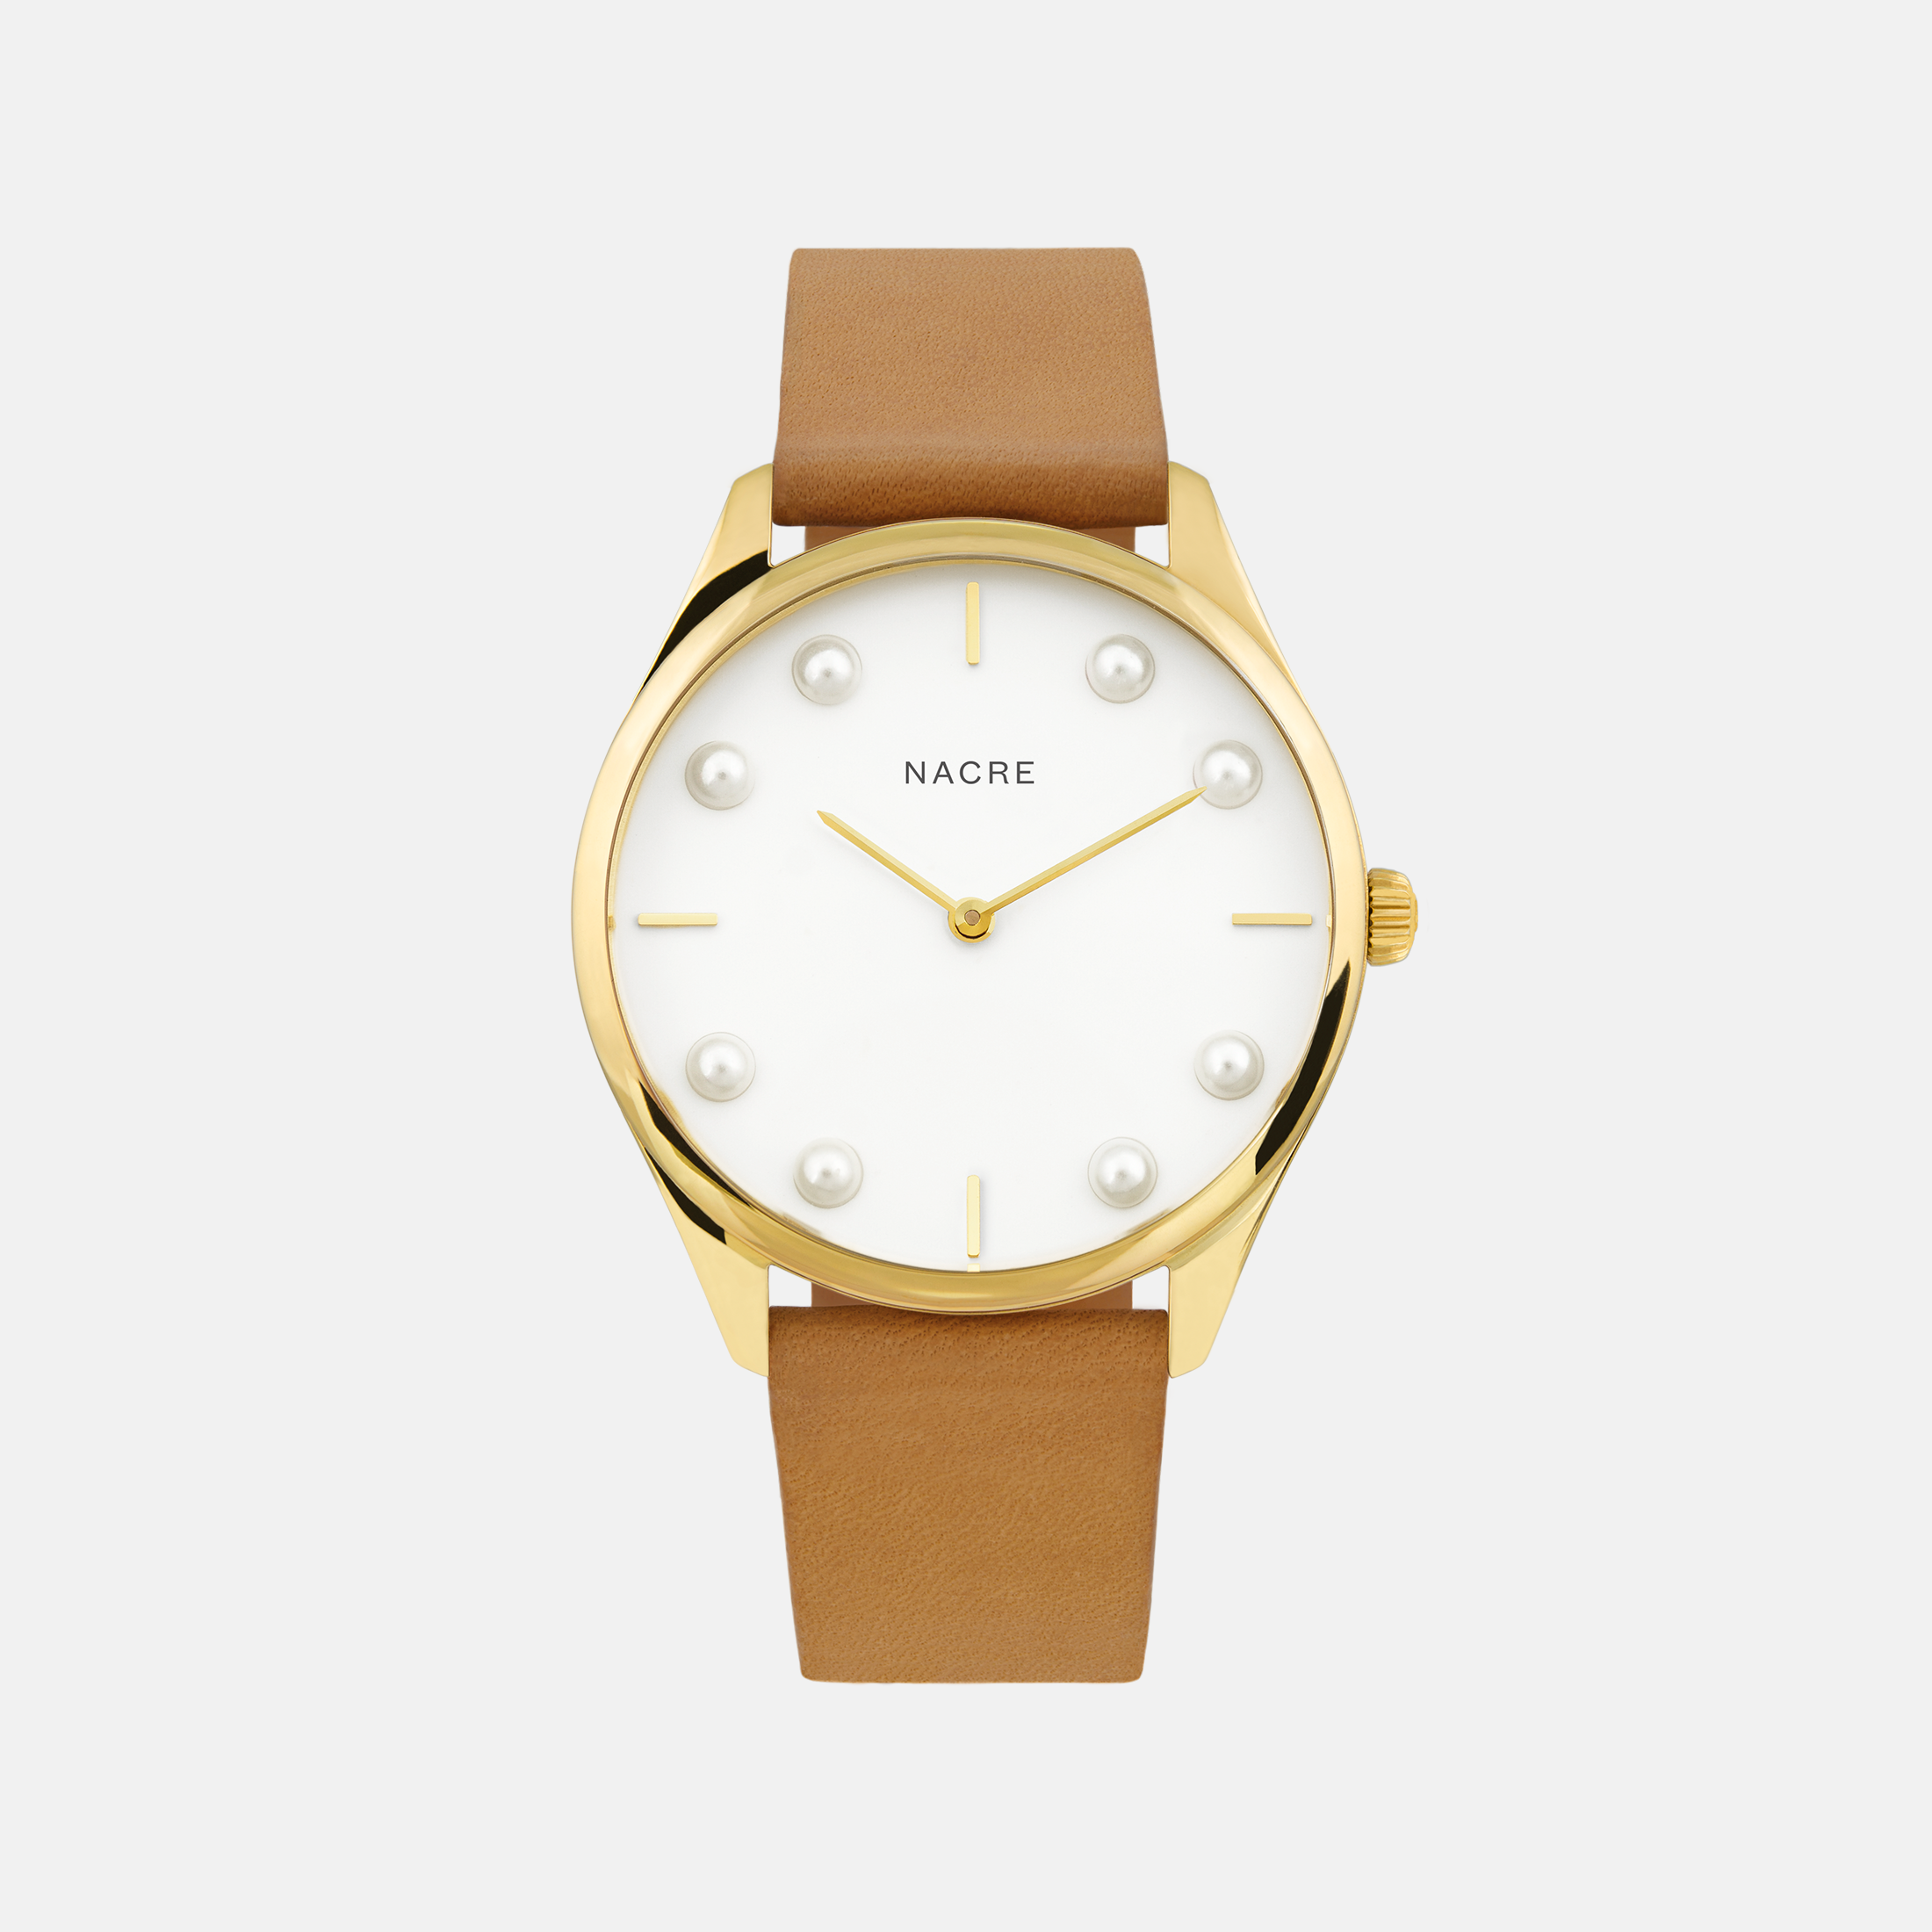 Lune 8 - Gold and White - Saddle Leather